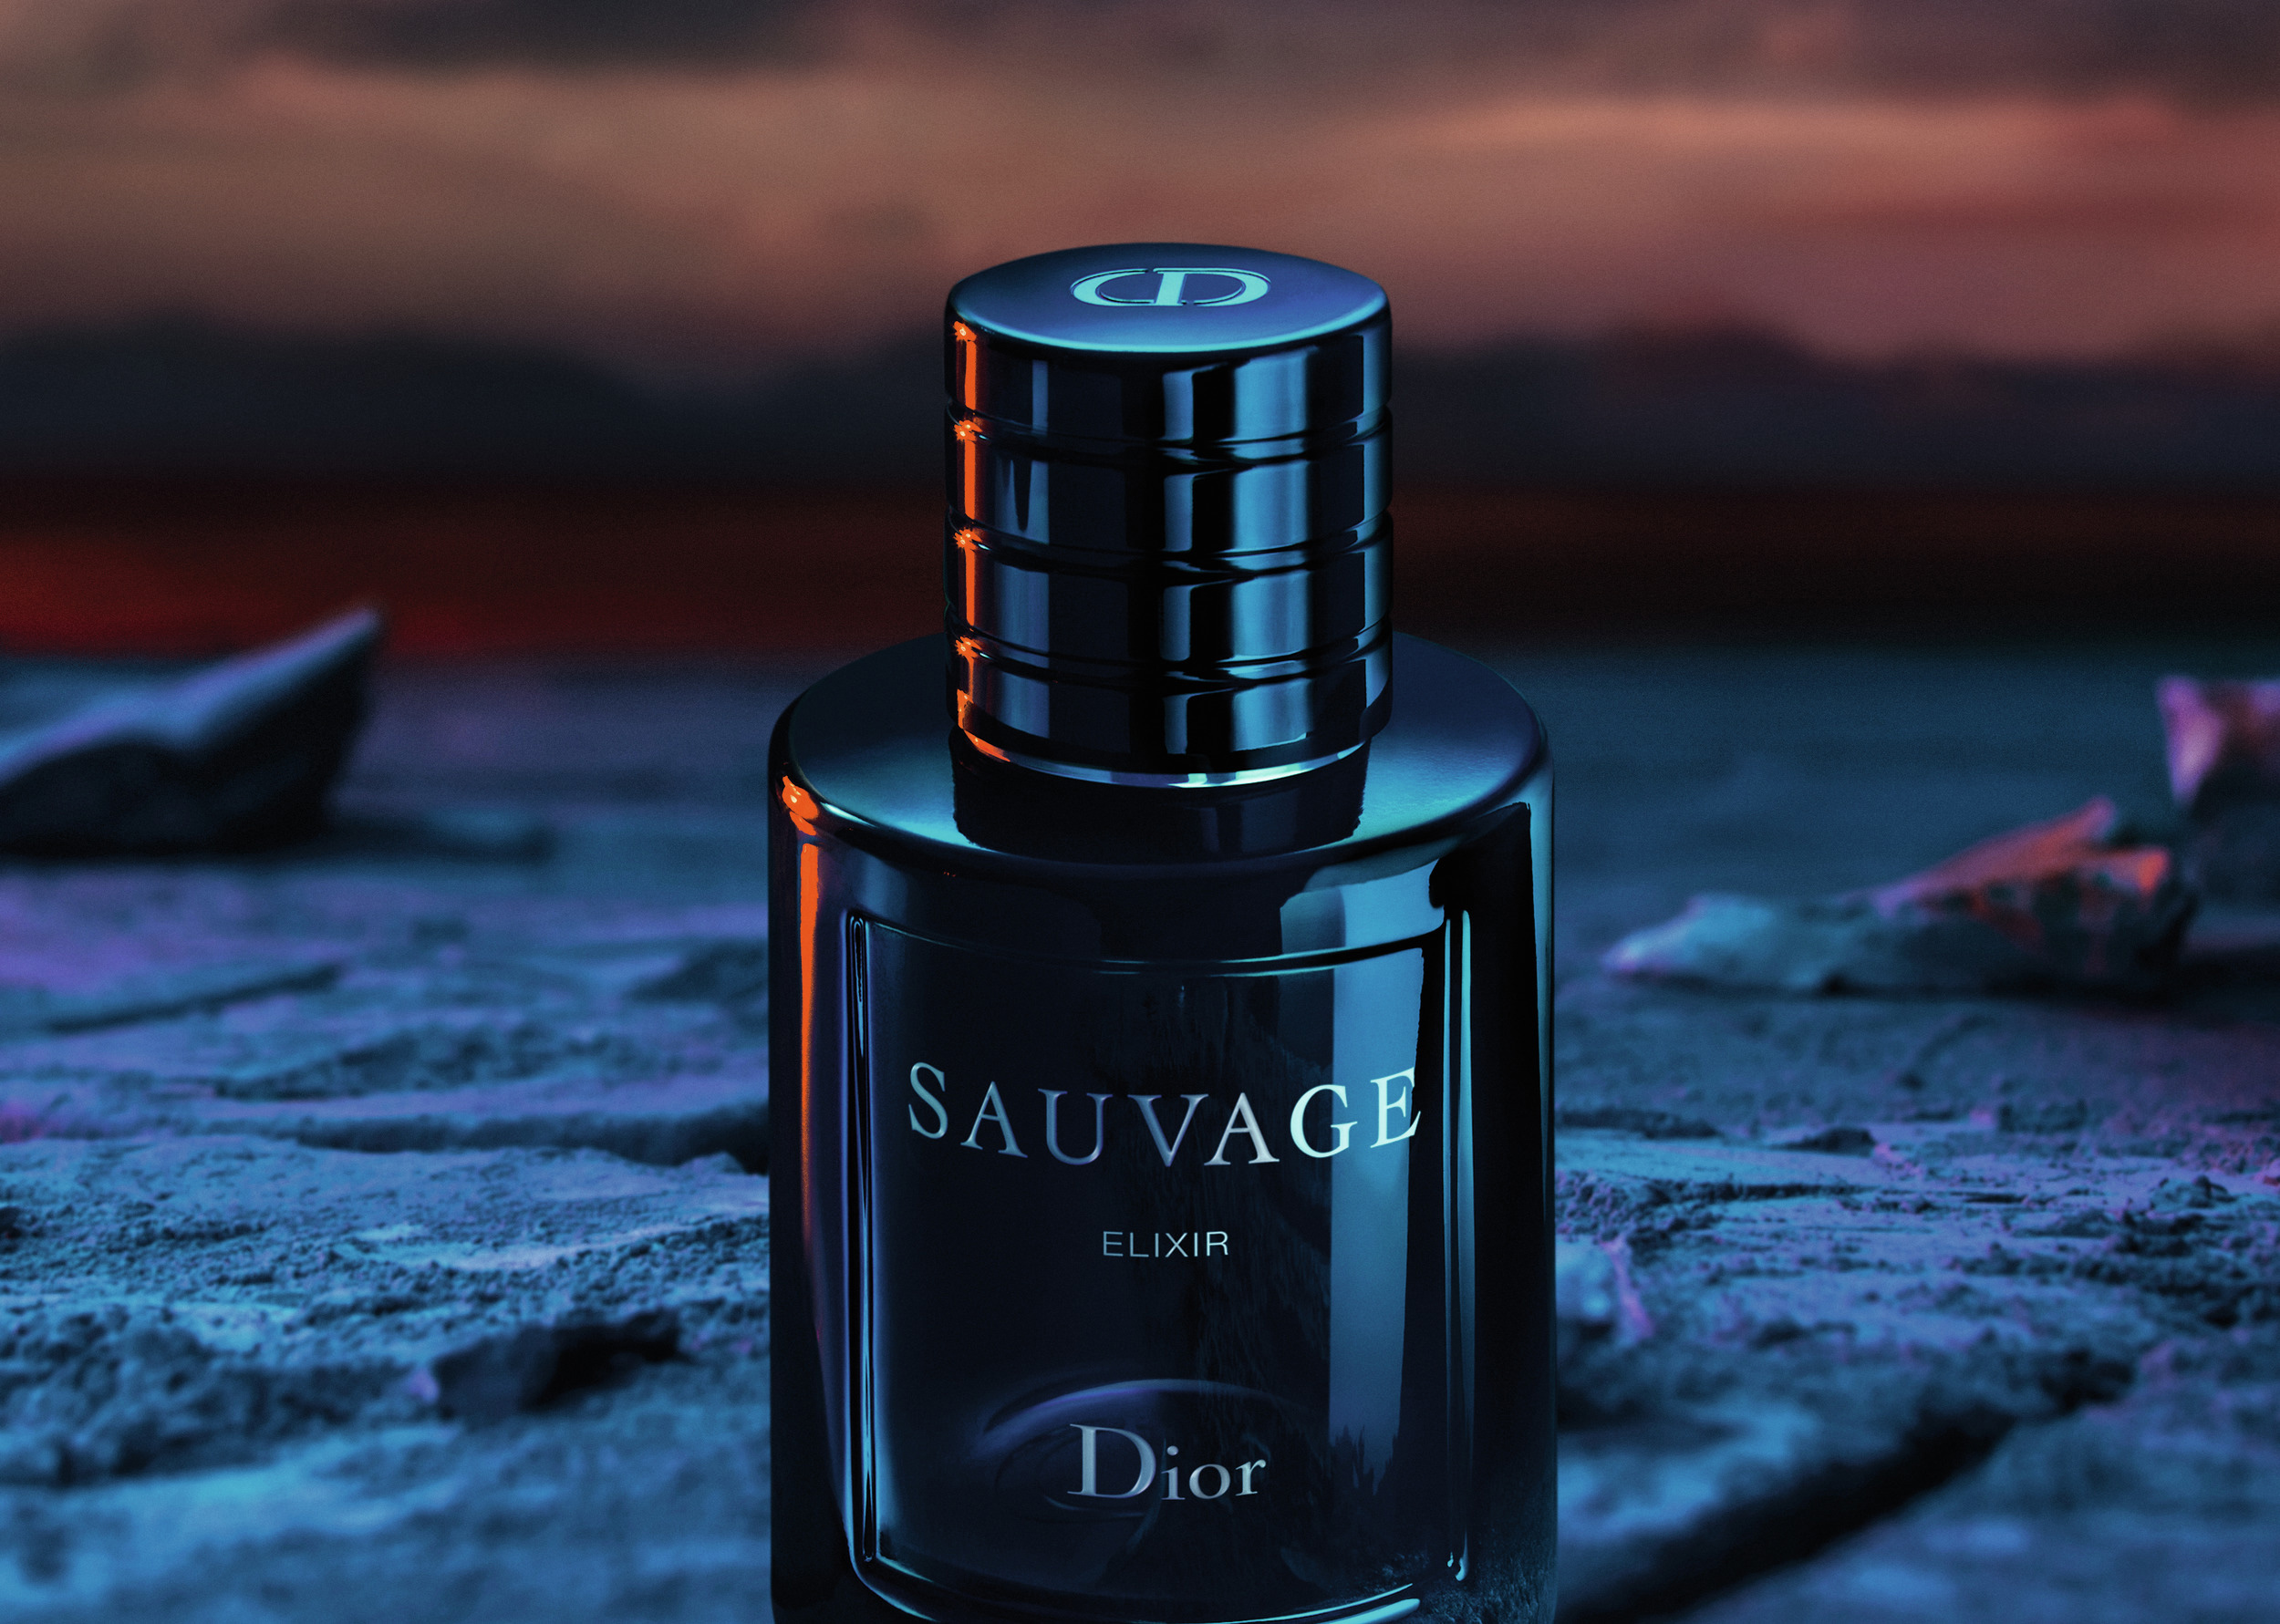 Smell Like A Legend With The New Dior Sauvage Elixir - ICON